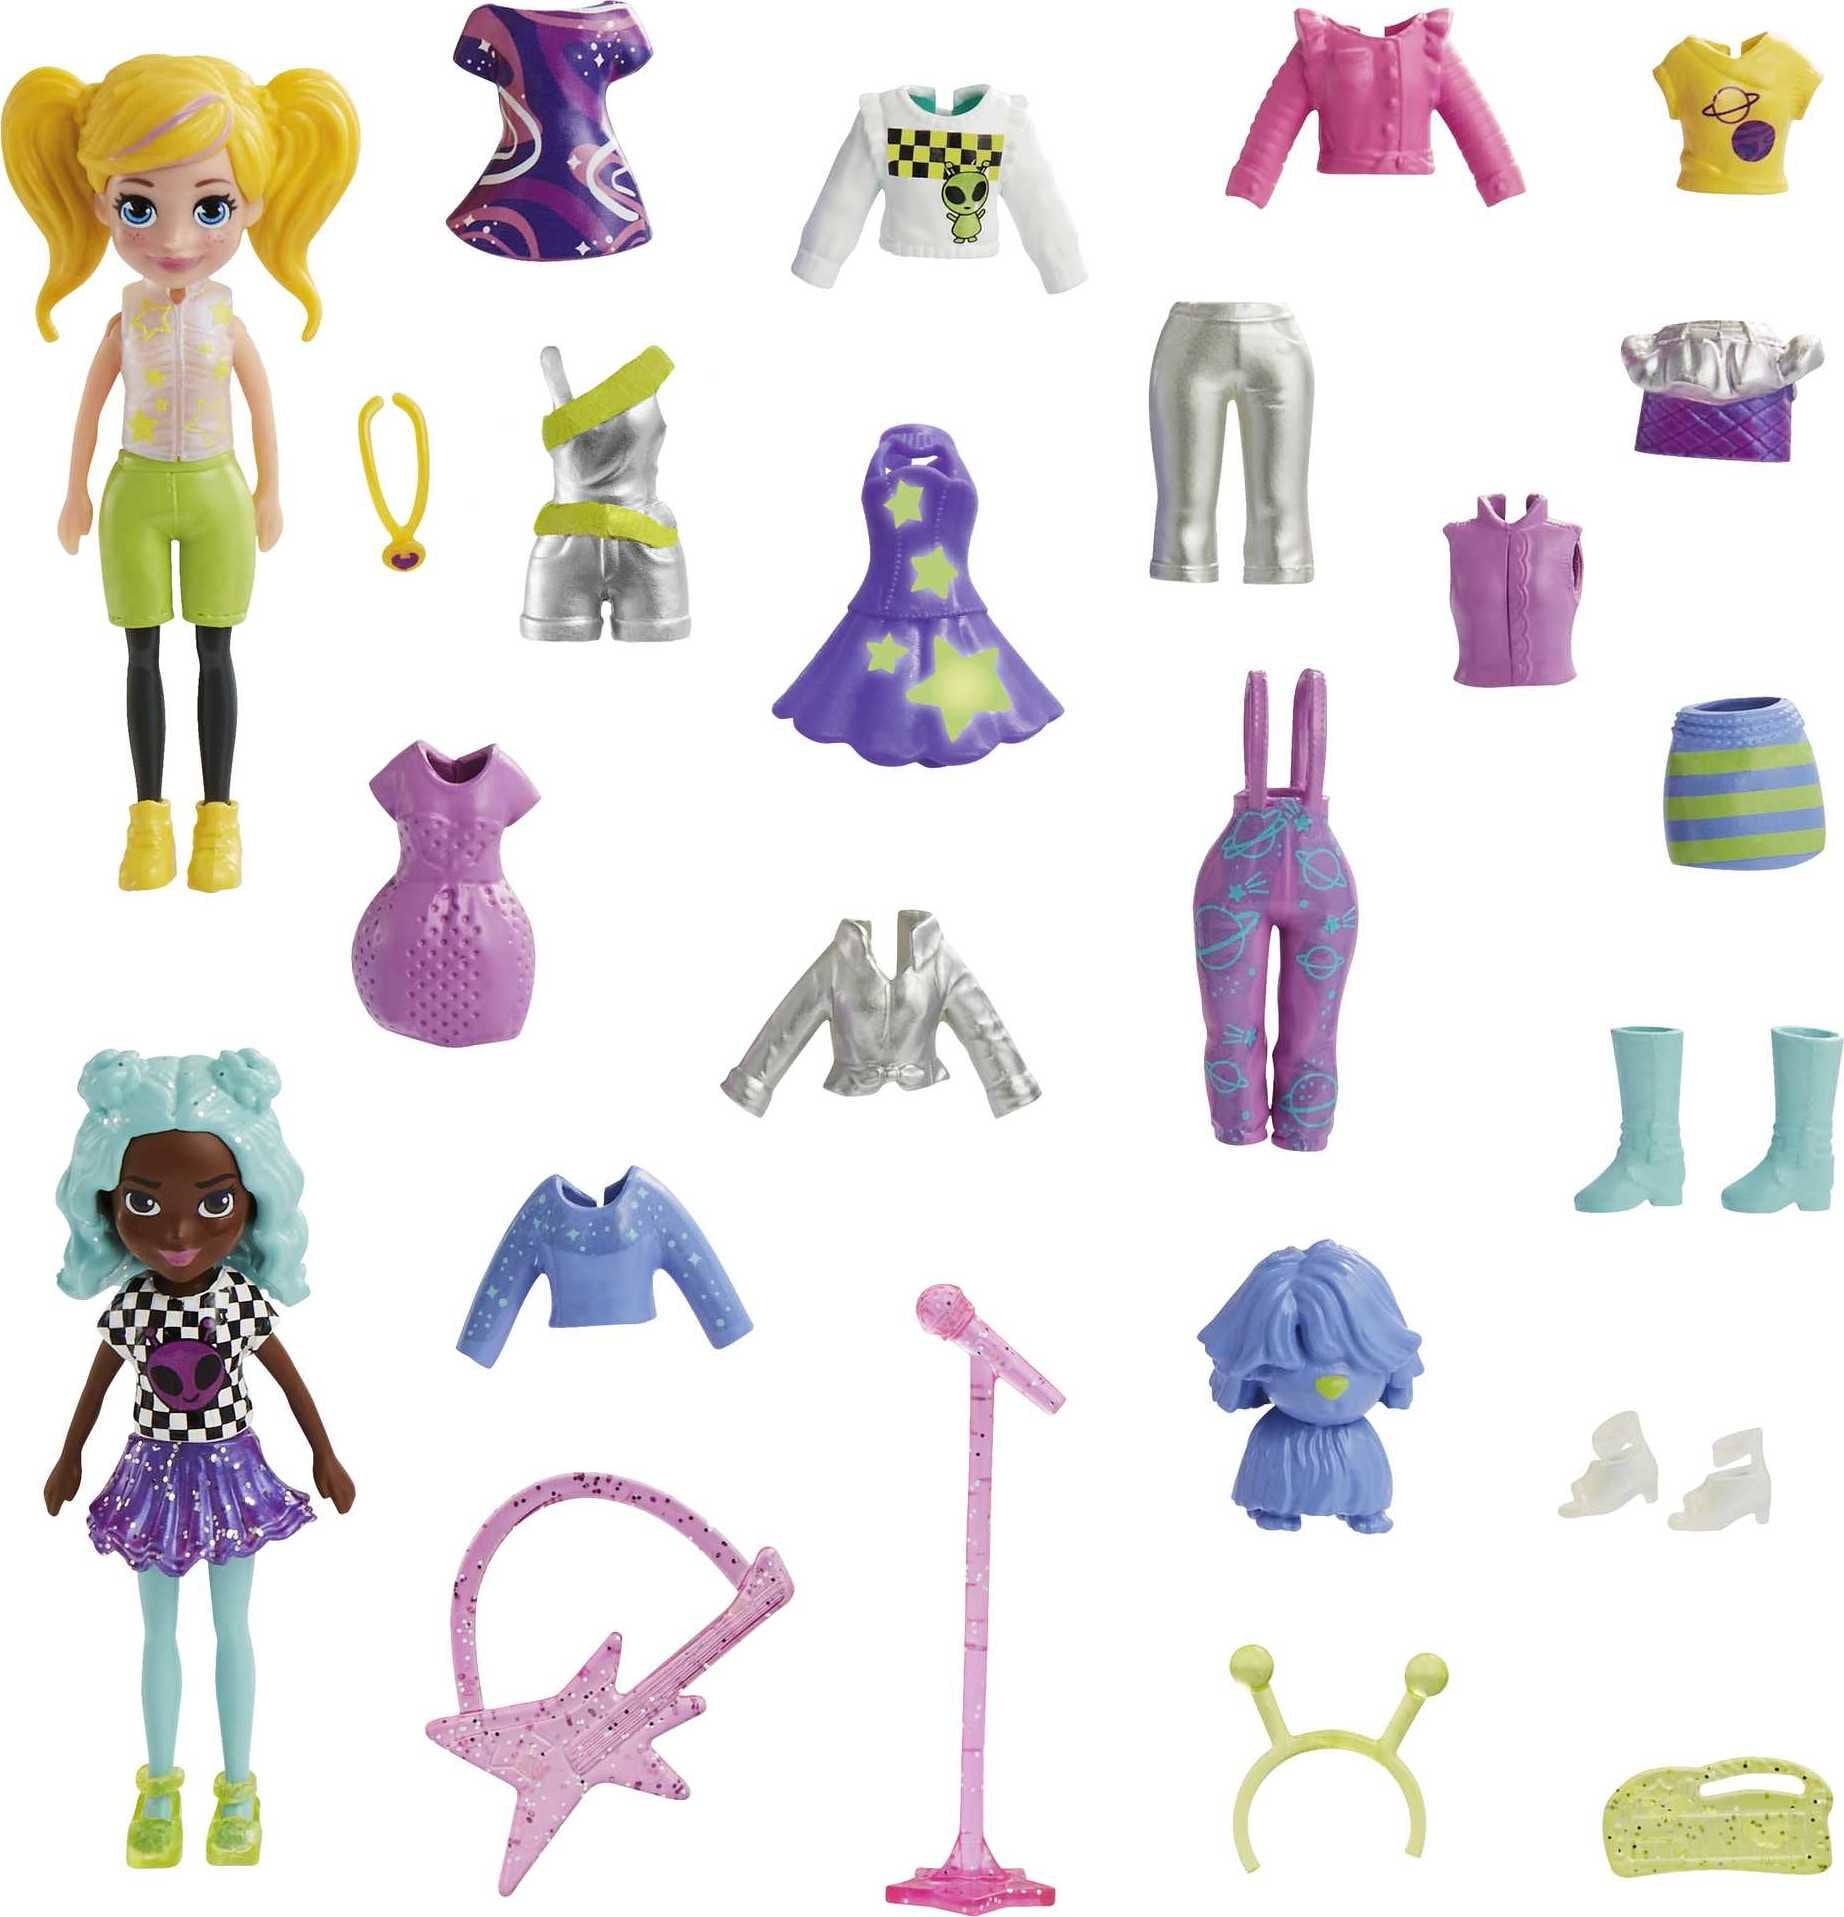 Polly Pocket 2 Dolls and 25 Accessories, Glow-in-the-Dark Pop Star